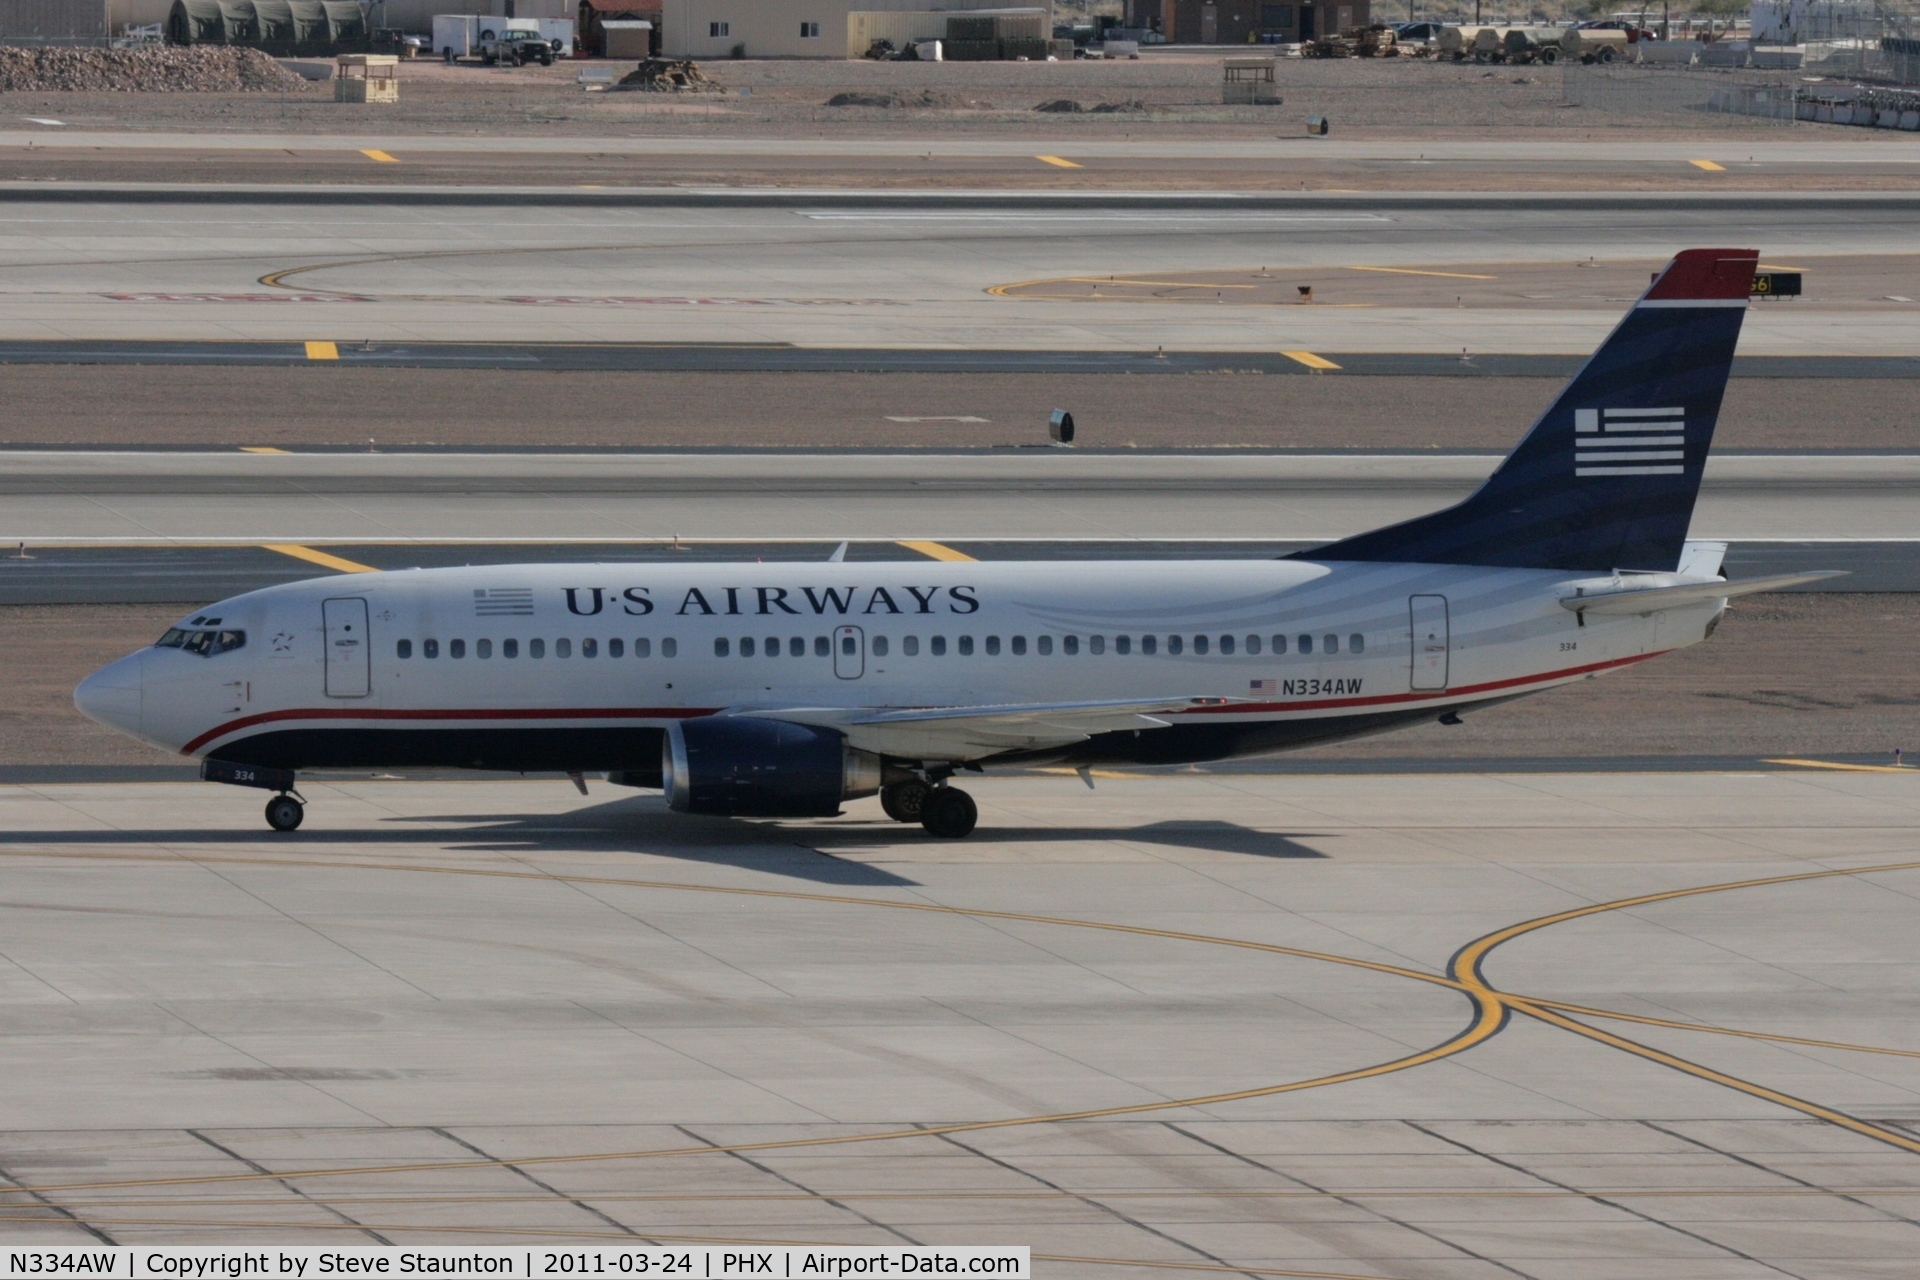 N334AW, 1987 Boeing 737-3Y0 C/N 23748, Taken at Phoenix Sky Harbor Airport, in March 2011 whilst on an Aeroprint Aviation tour